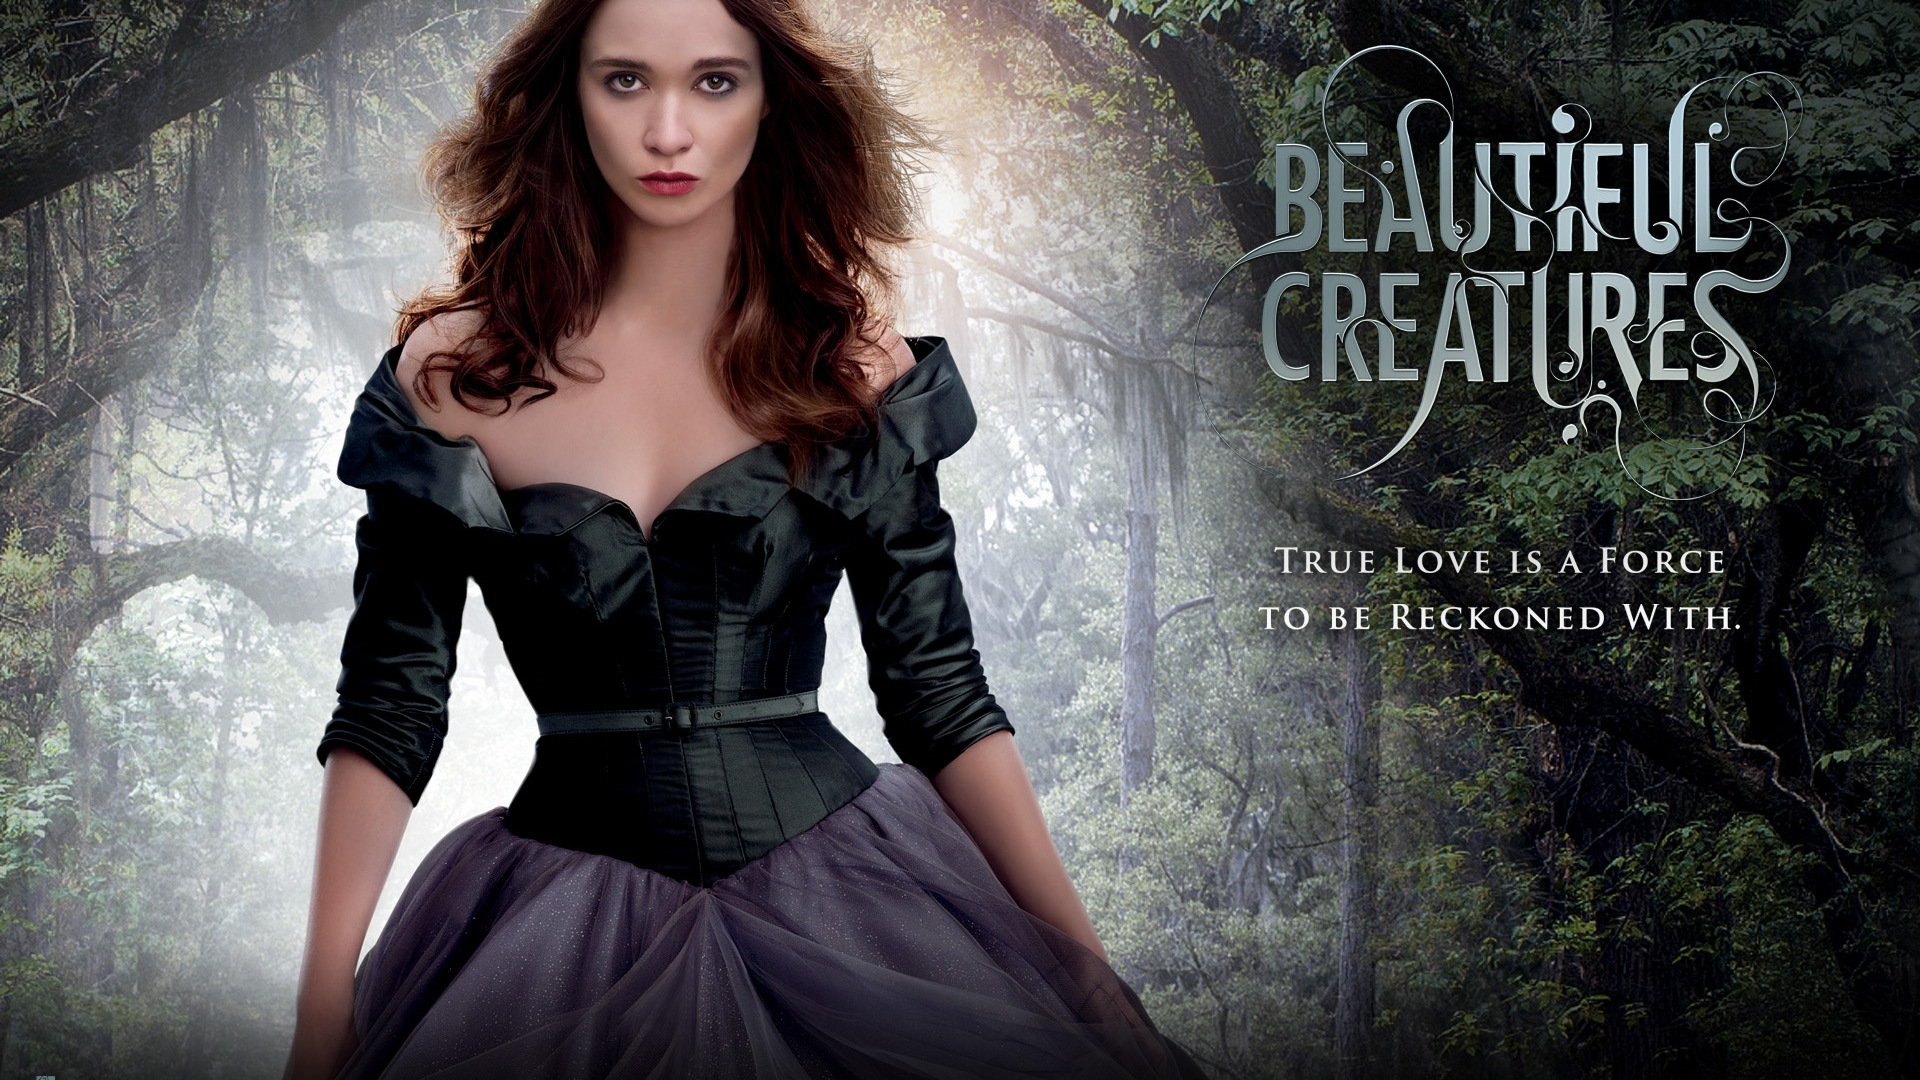 Beautiful Creatures 2013 HD movie wallpapers #7 - 1920x1080